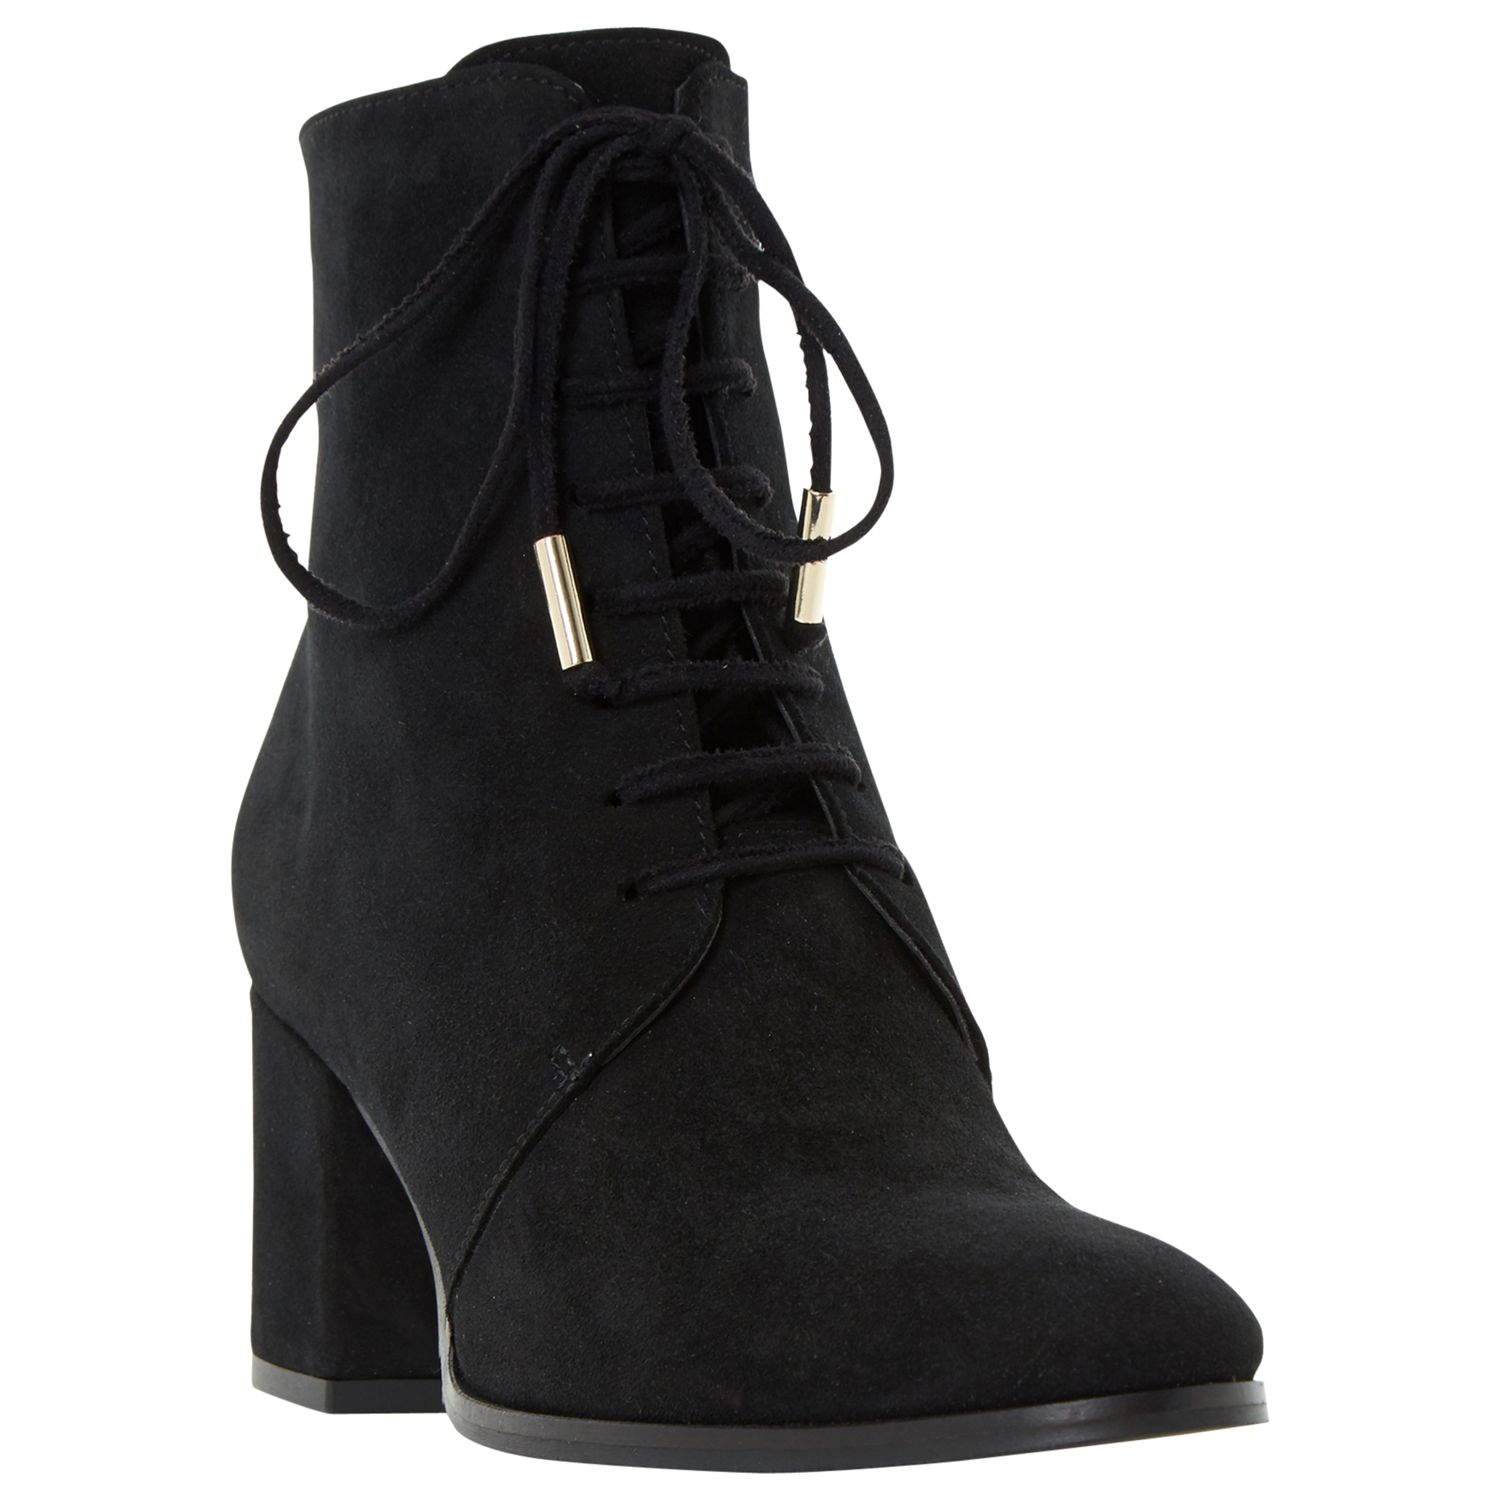 Dune Olita Lace Up Ankle Boots, Black, 6